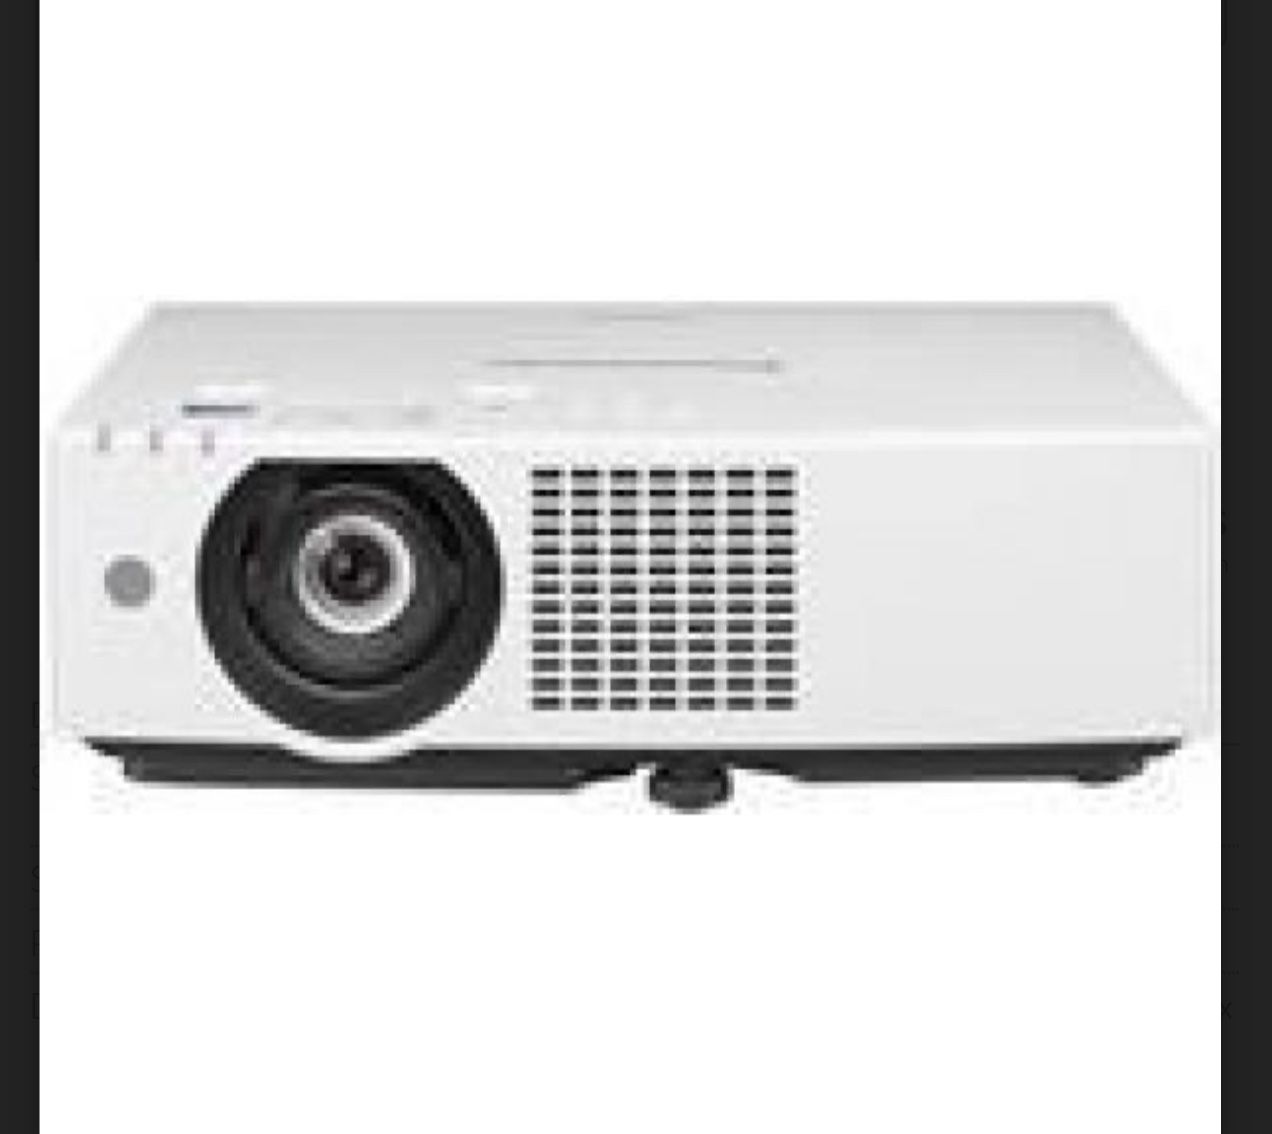 Laser Projector PT-MZ880 Series With VMAXT97 Motorized Screen